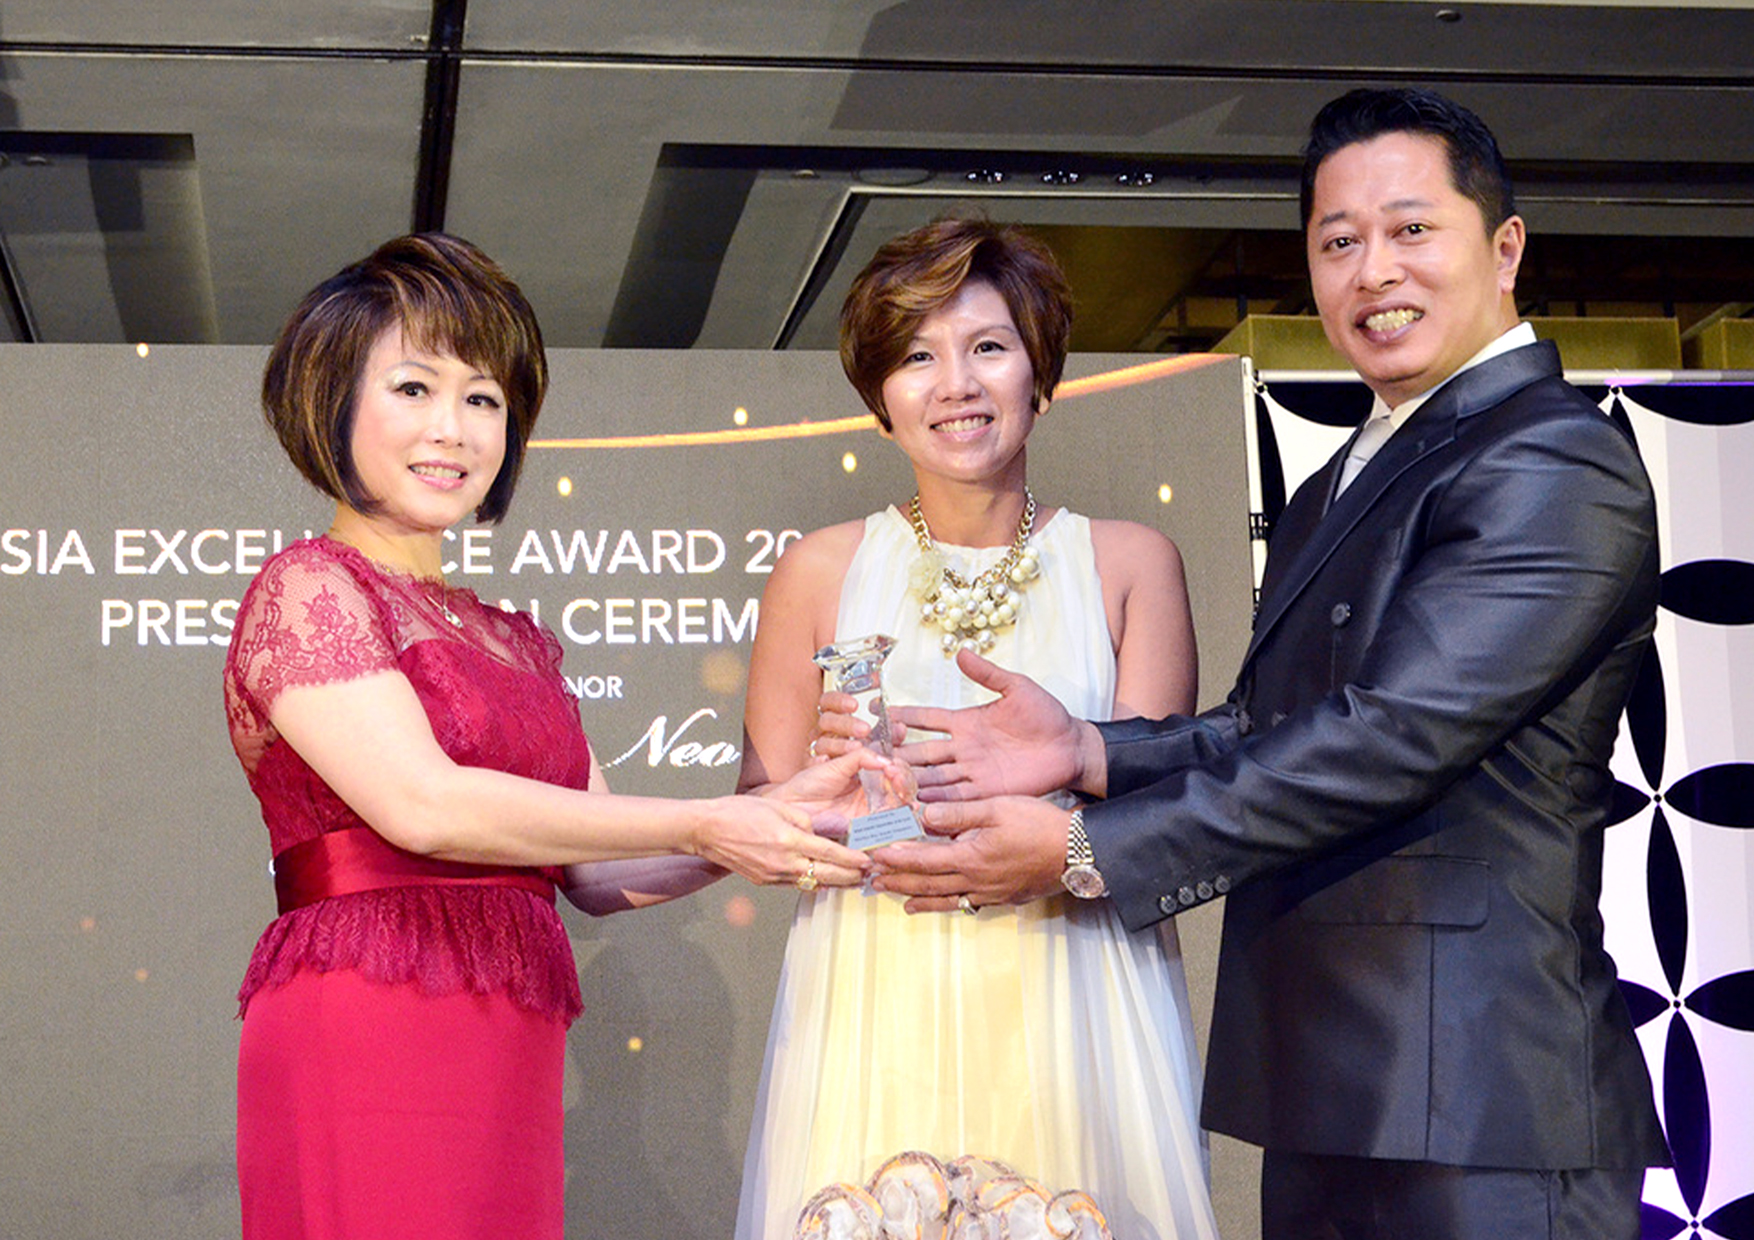 Asia Excellence Award presented by Member of Parliament Dr Lily Neo